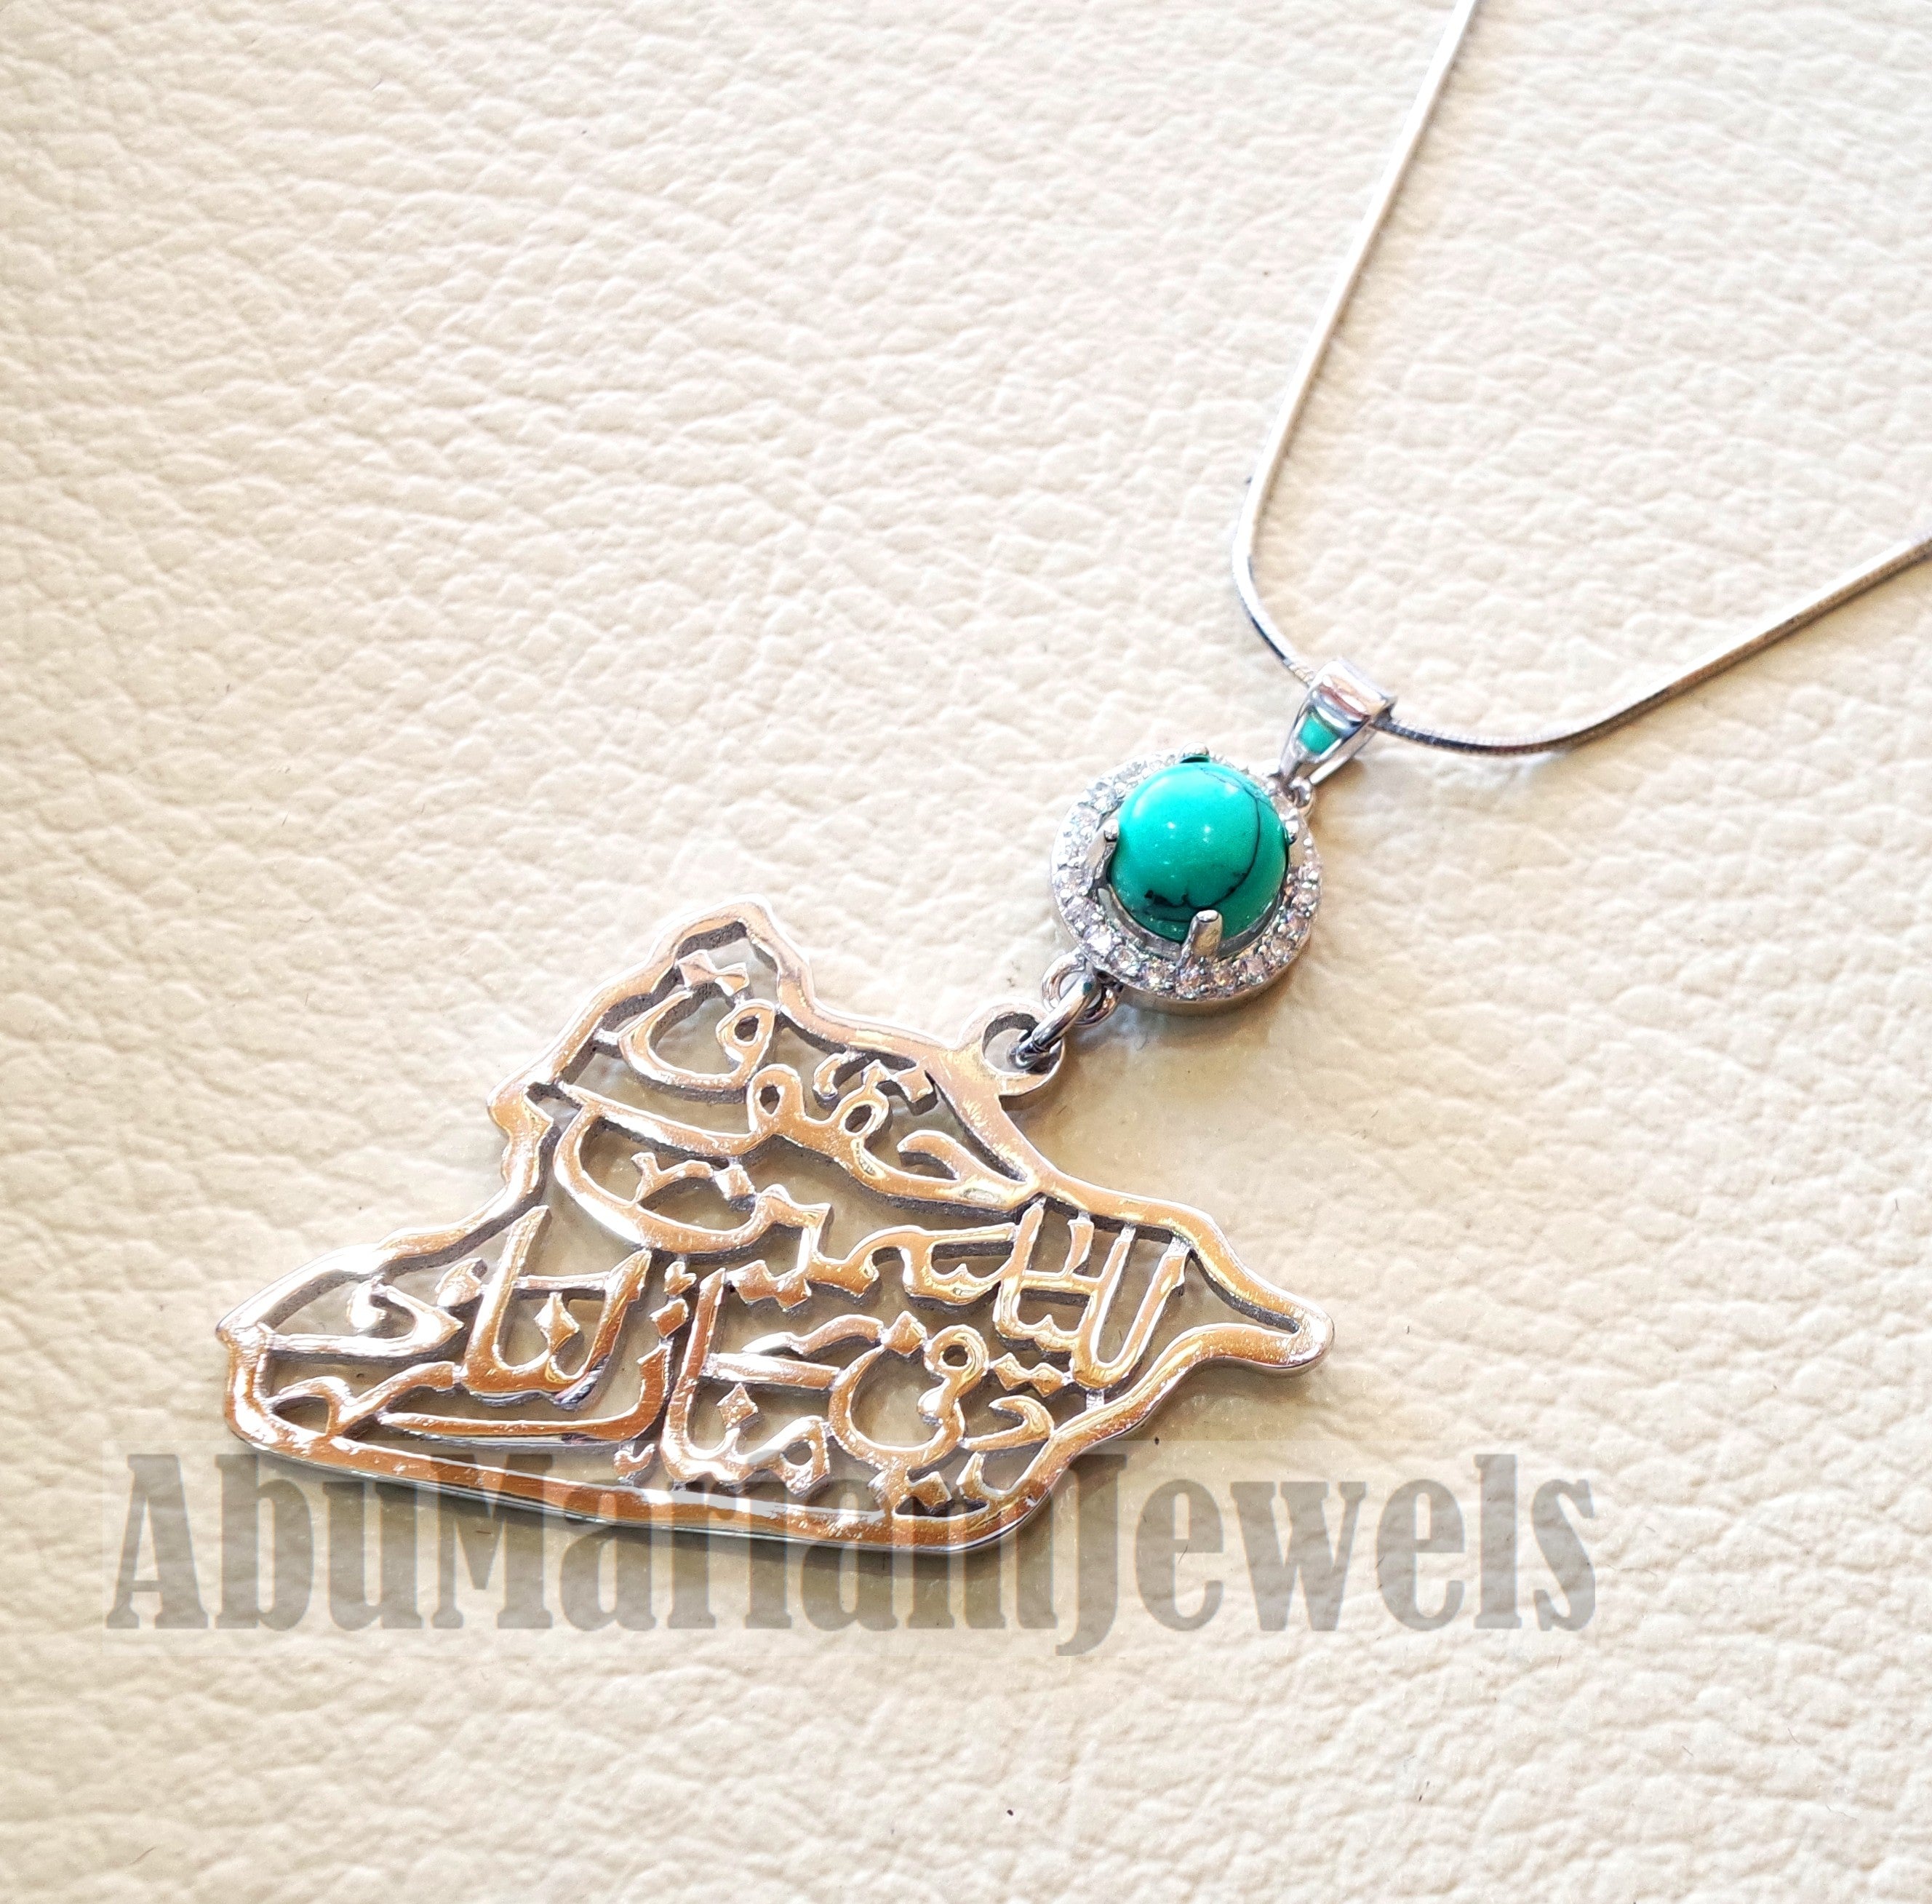 Syria map pendant with famous poem verse sterling silver 925 k and natural turquoise jewelry arabic fast shipping خارطه سوريا